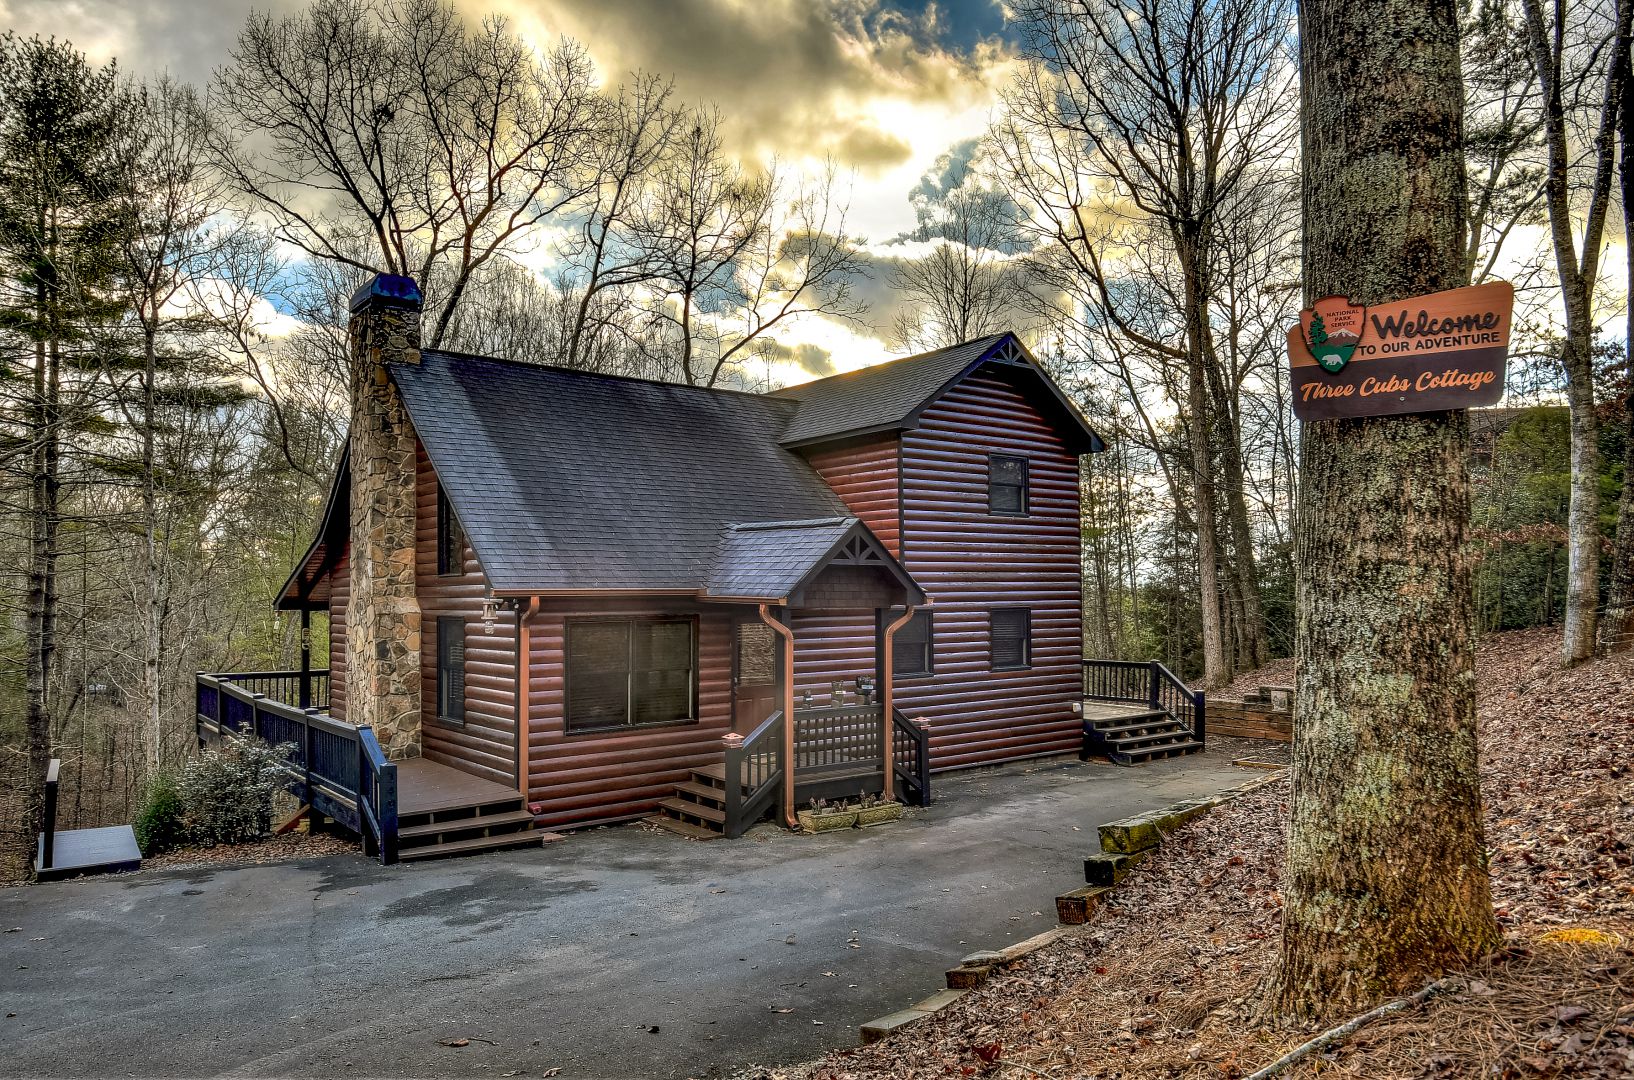 Three Cubs Cottage Rental Cabin